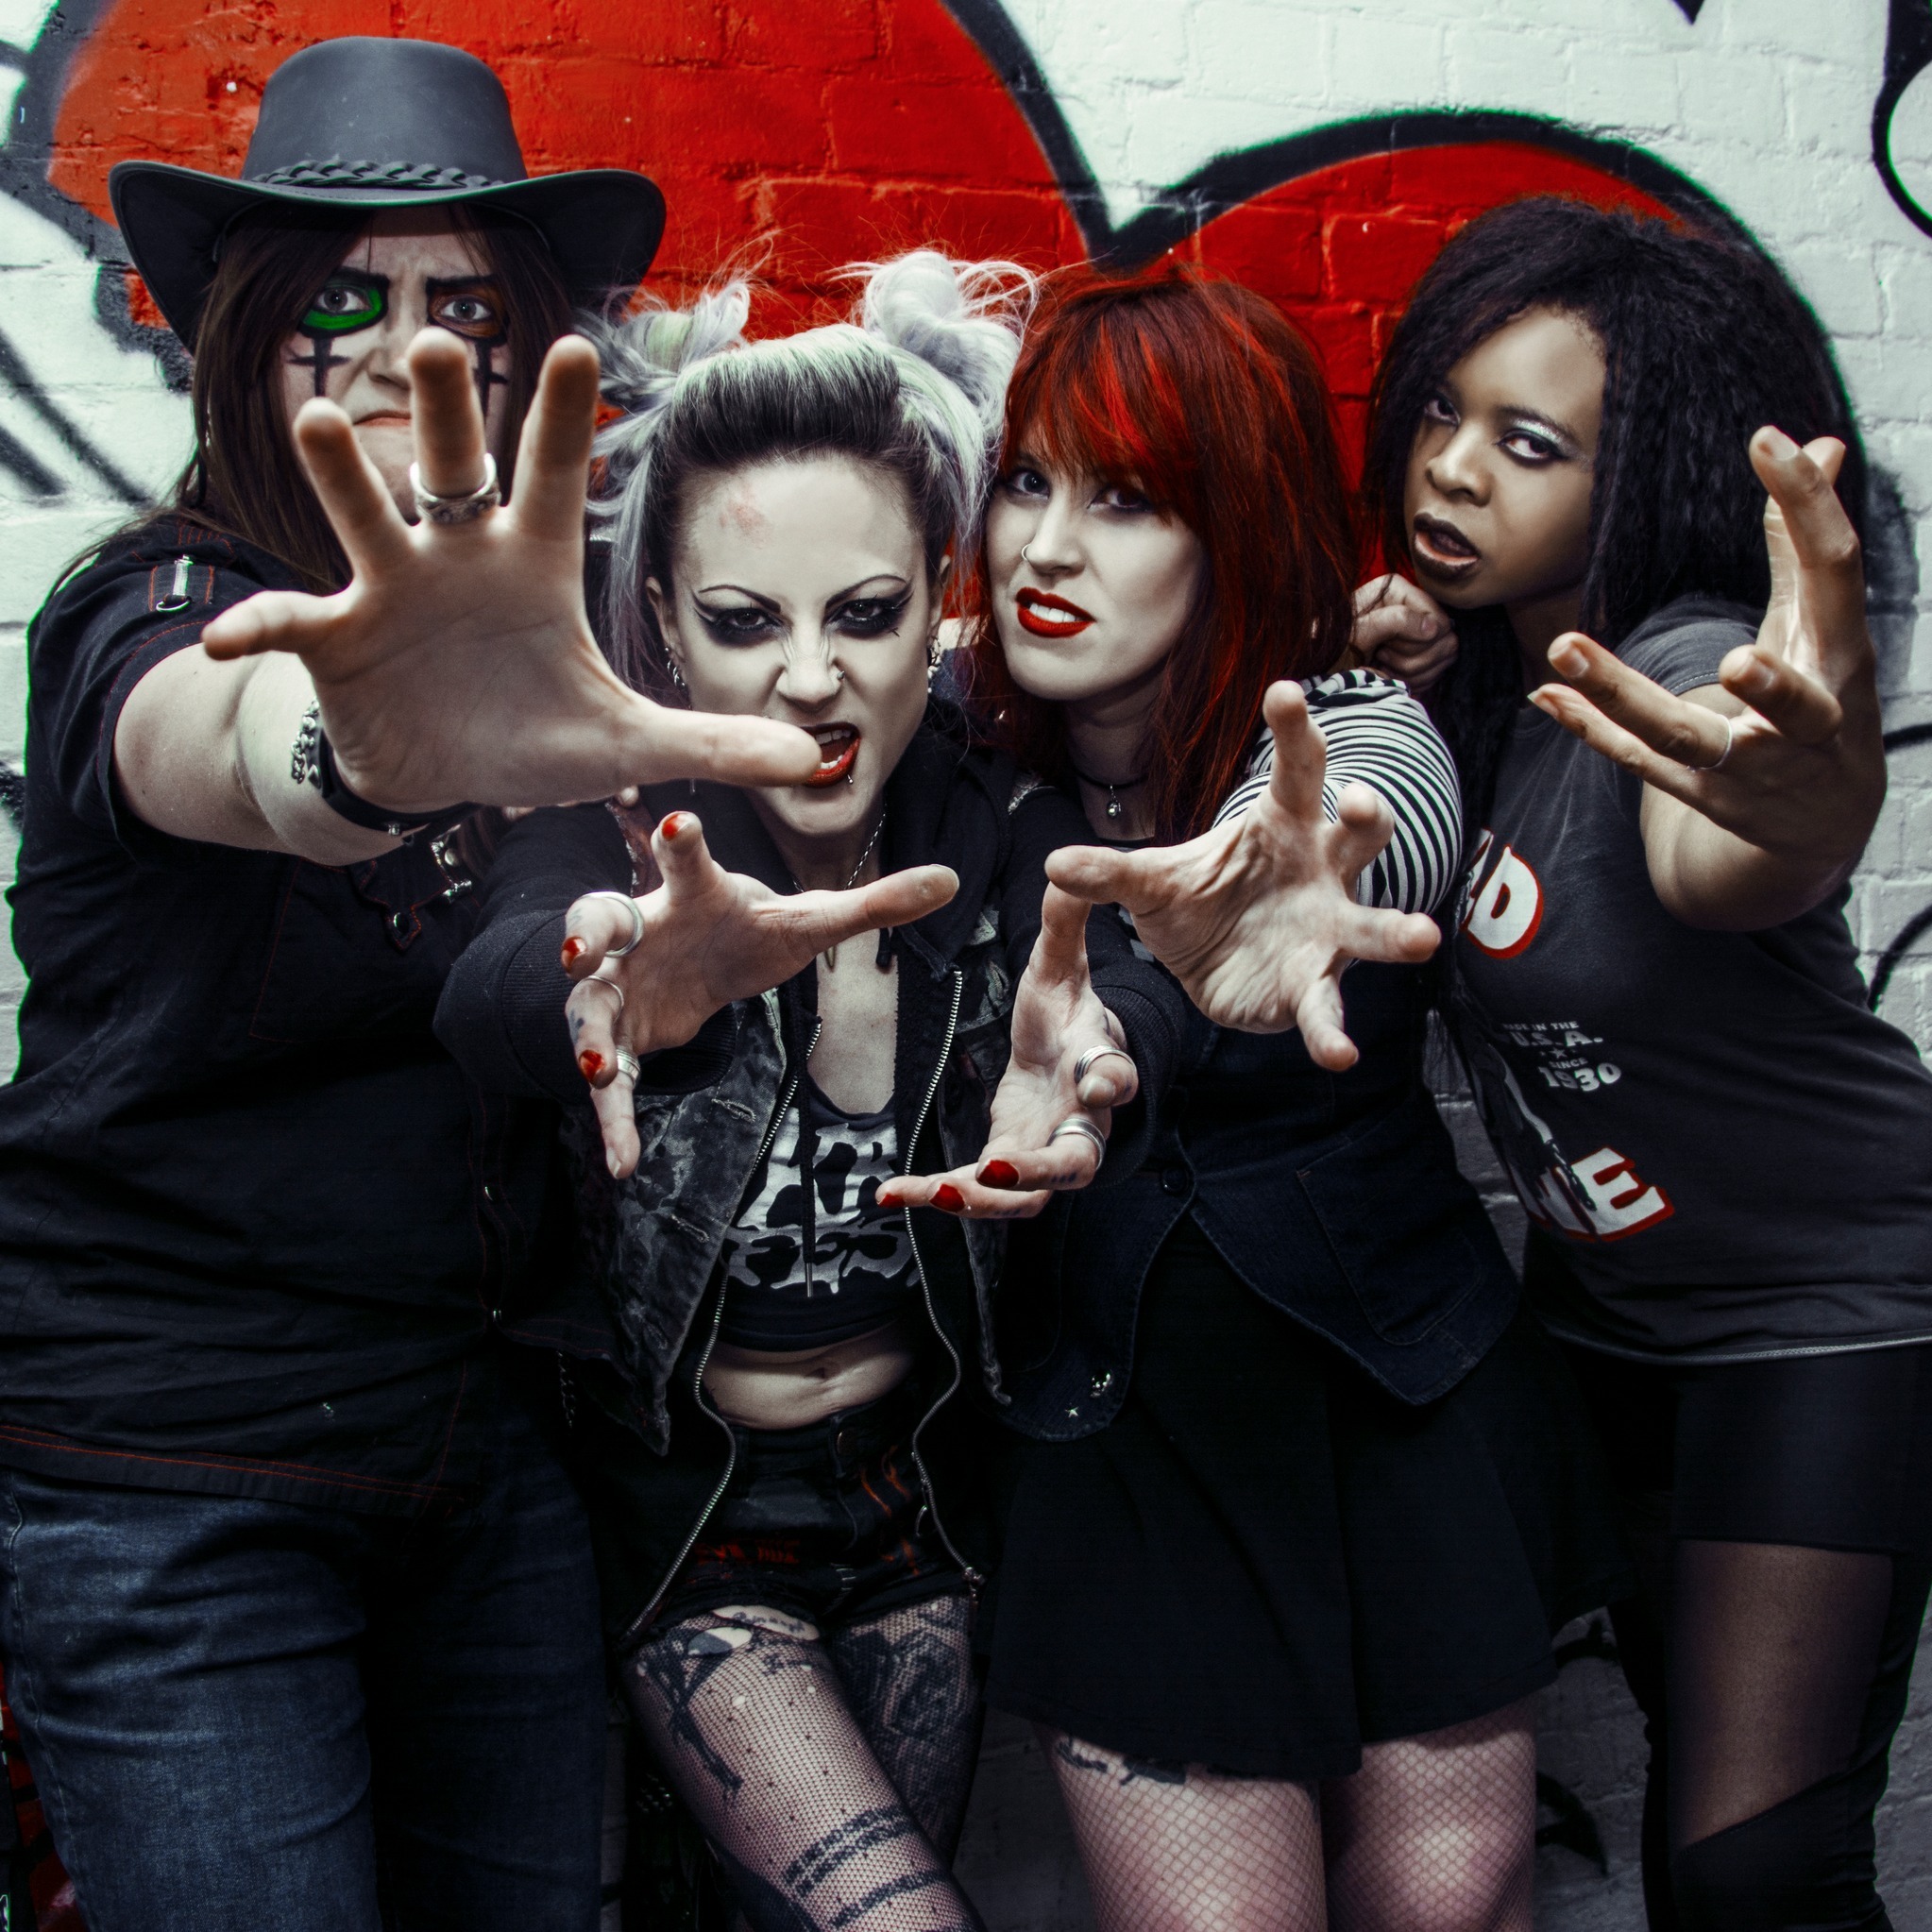 Lady Rage release a brand new video and single, and announce UK shows